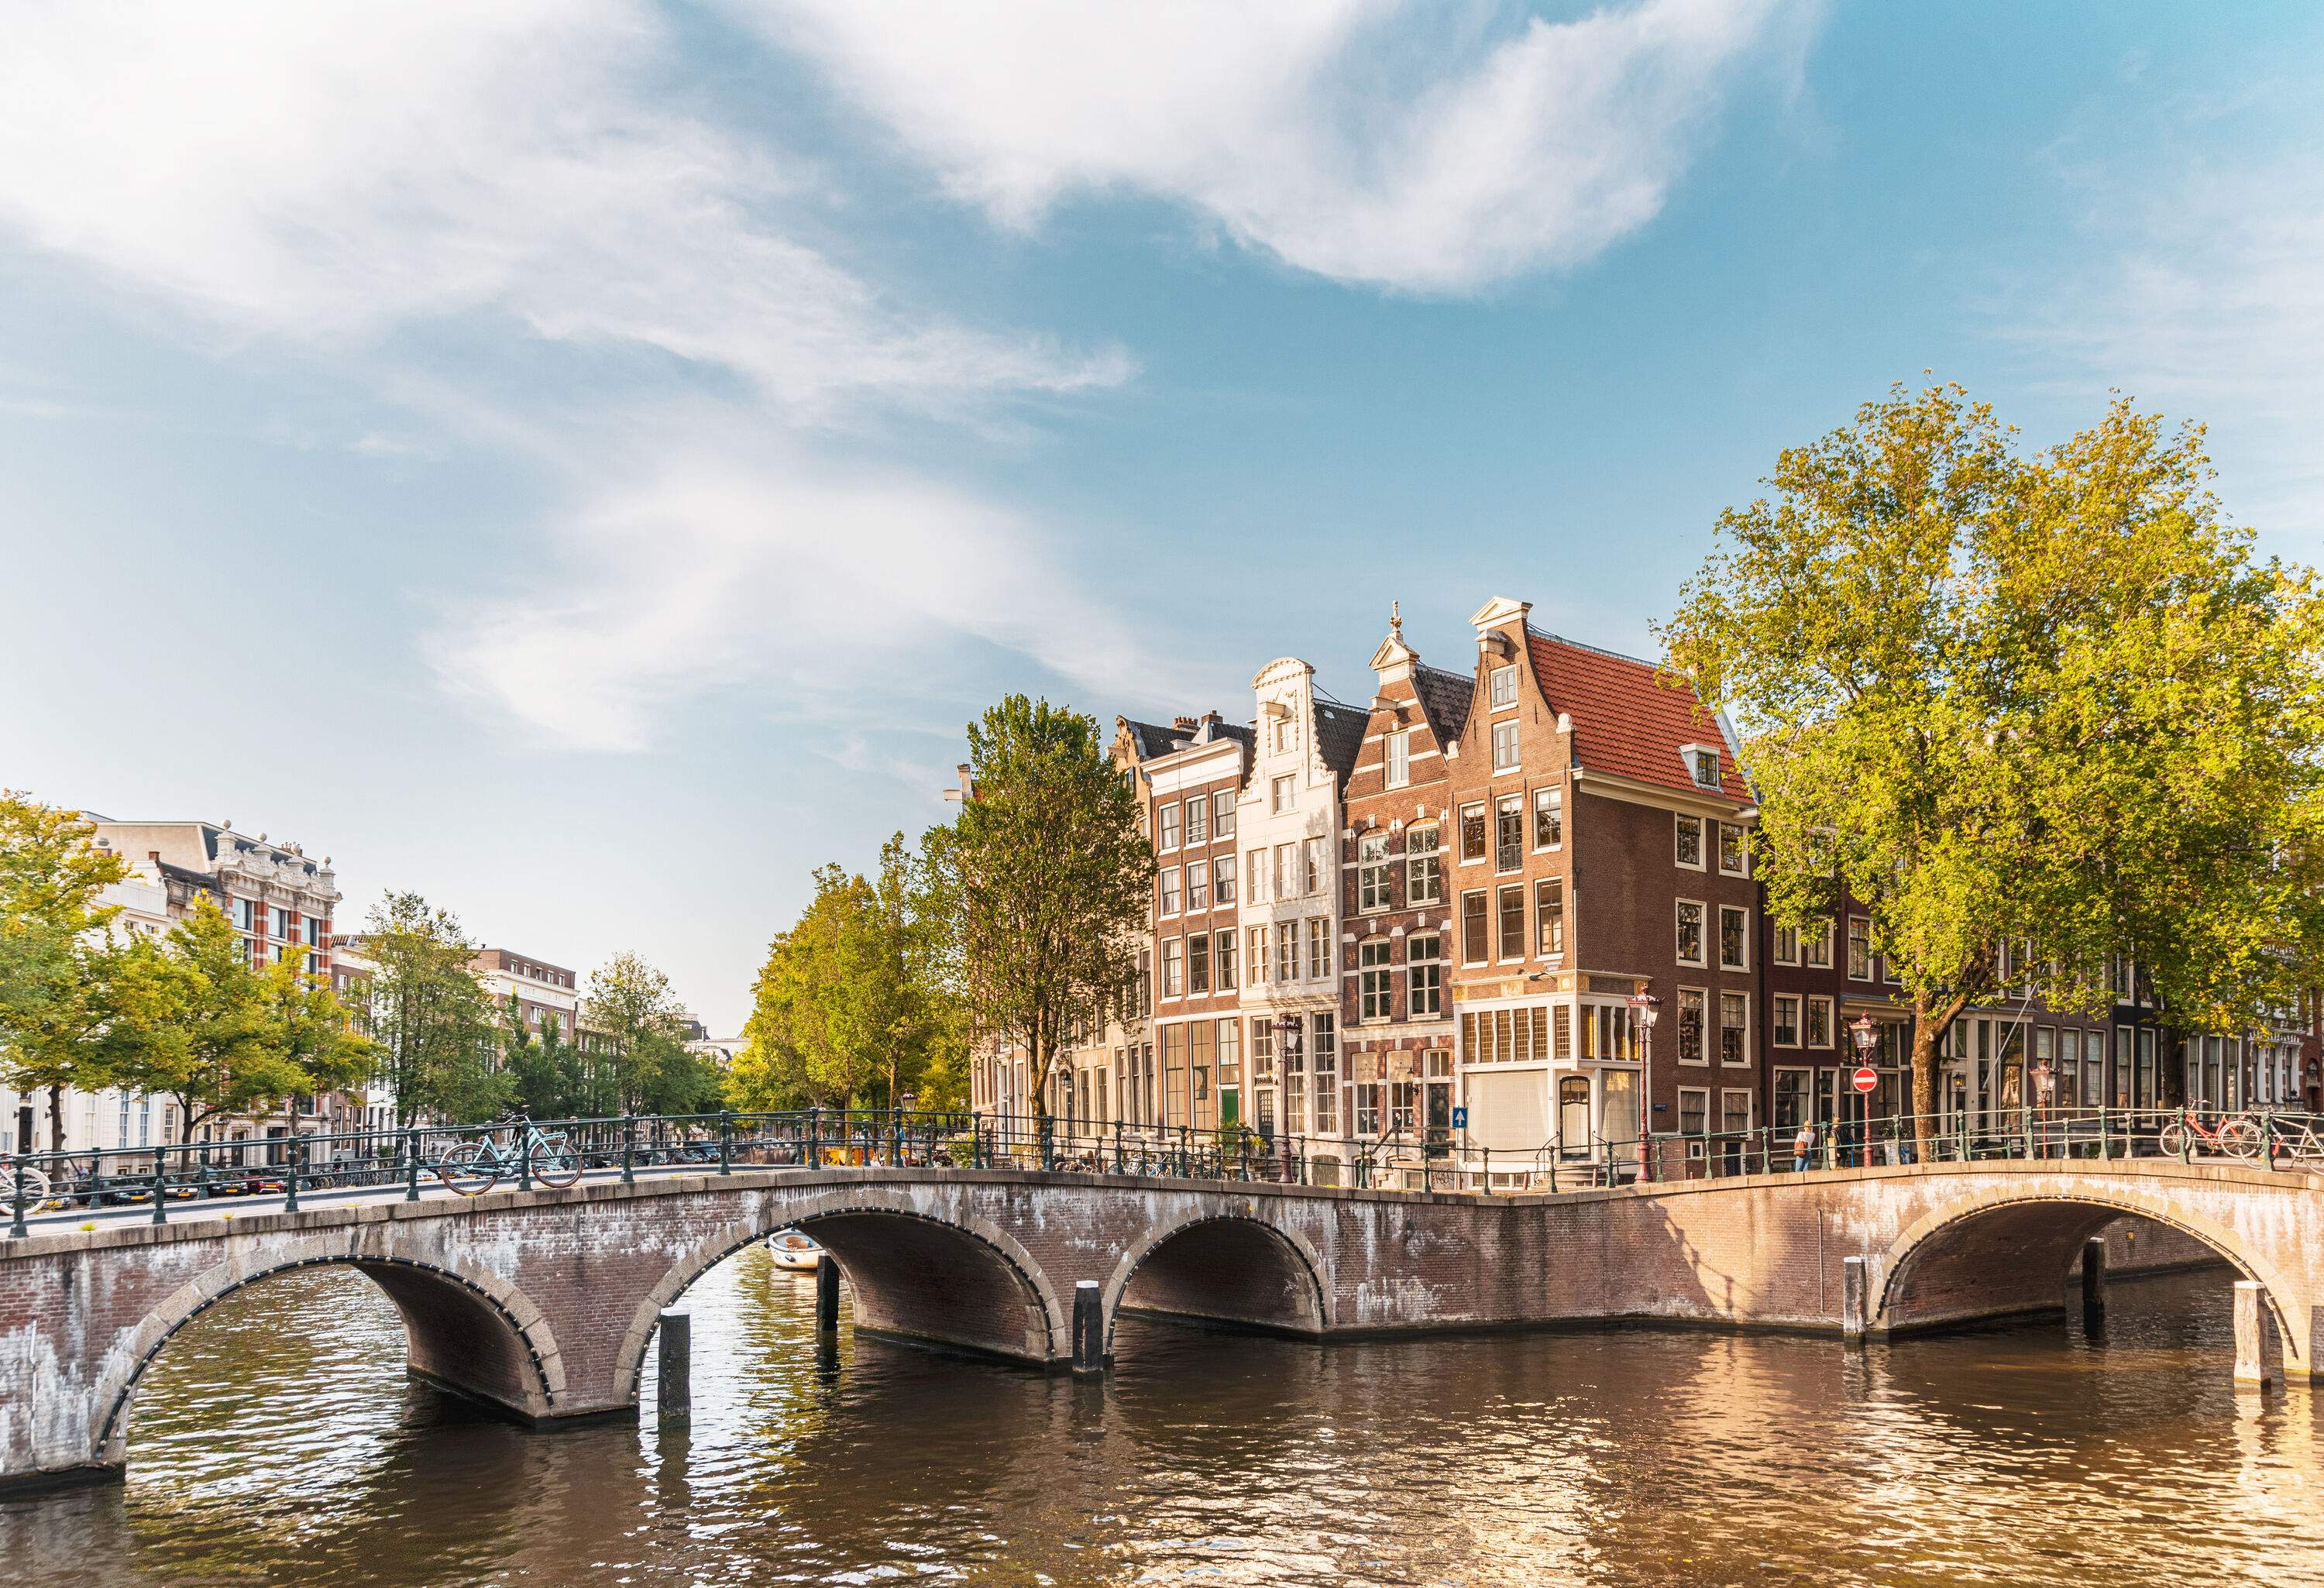 An intersecting arch bridges over a canal lined with trees and Dutch buildings.